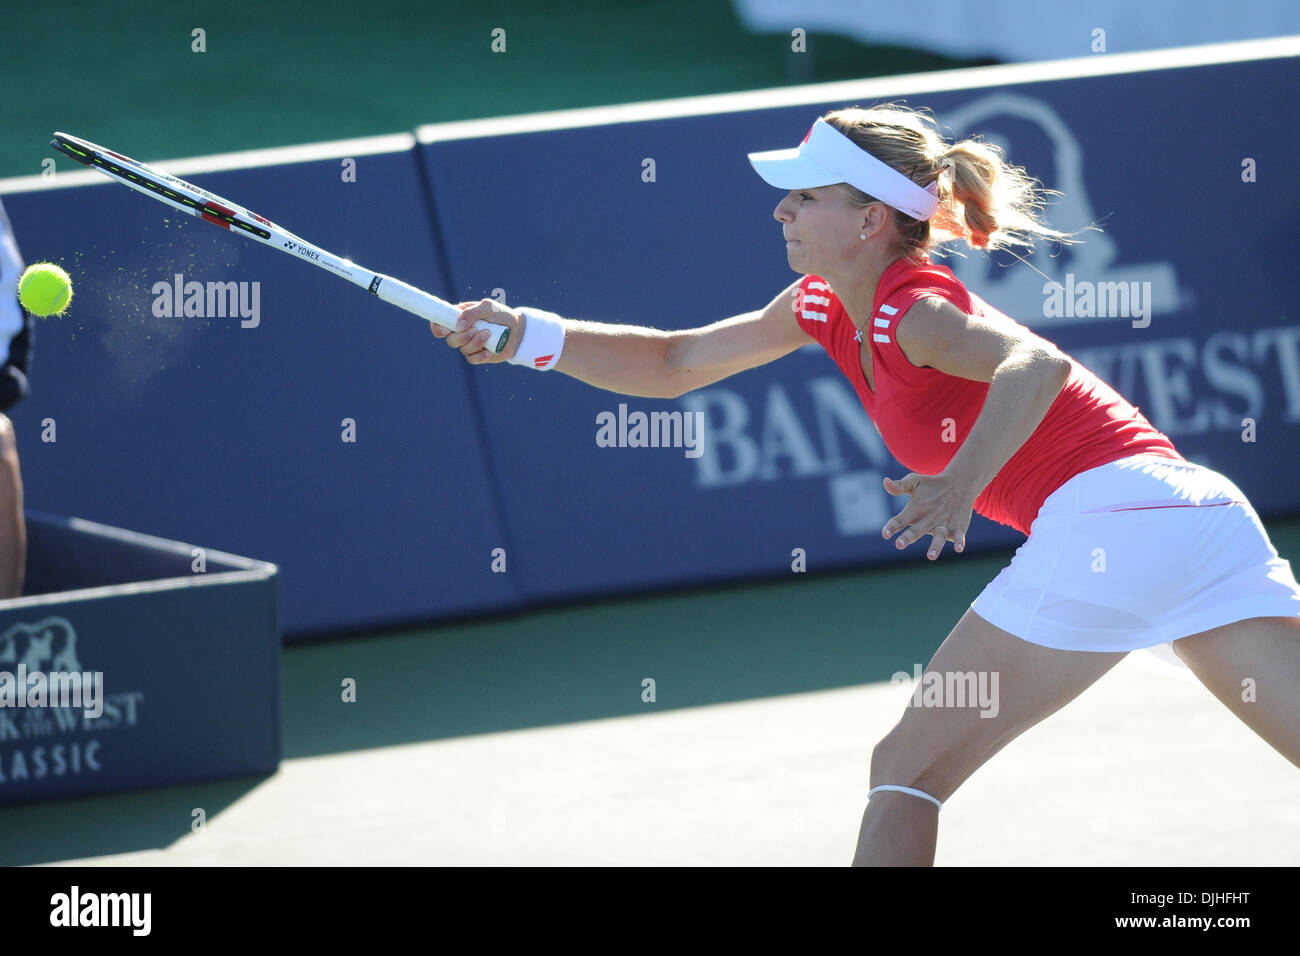 July 29, 2010 - Stanford, California, United States of America - 29 July 2010: Maria Kirilenko (RUS) competes during doubles action at the Bank of the West Classic at the Taube Family Tennis Center in Stanford, CA.  Kirilenko and Victoria Azarenka beat Shahar Peer and Alisa Kleybanova 6-3, 4-6, 10-3..Mandatory Credit: Matt Cohen / Southcreek Global (Credit Image: © Southcreek Globa Stock Photo